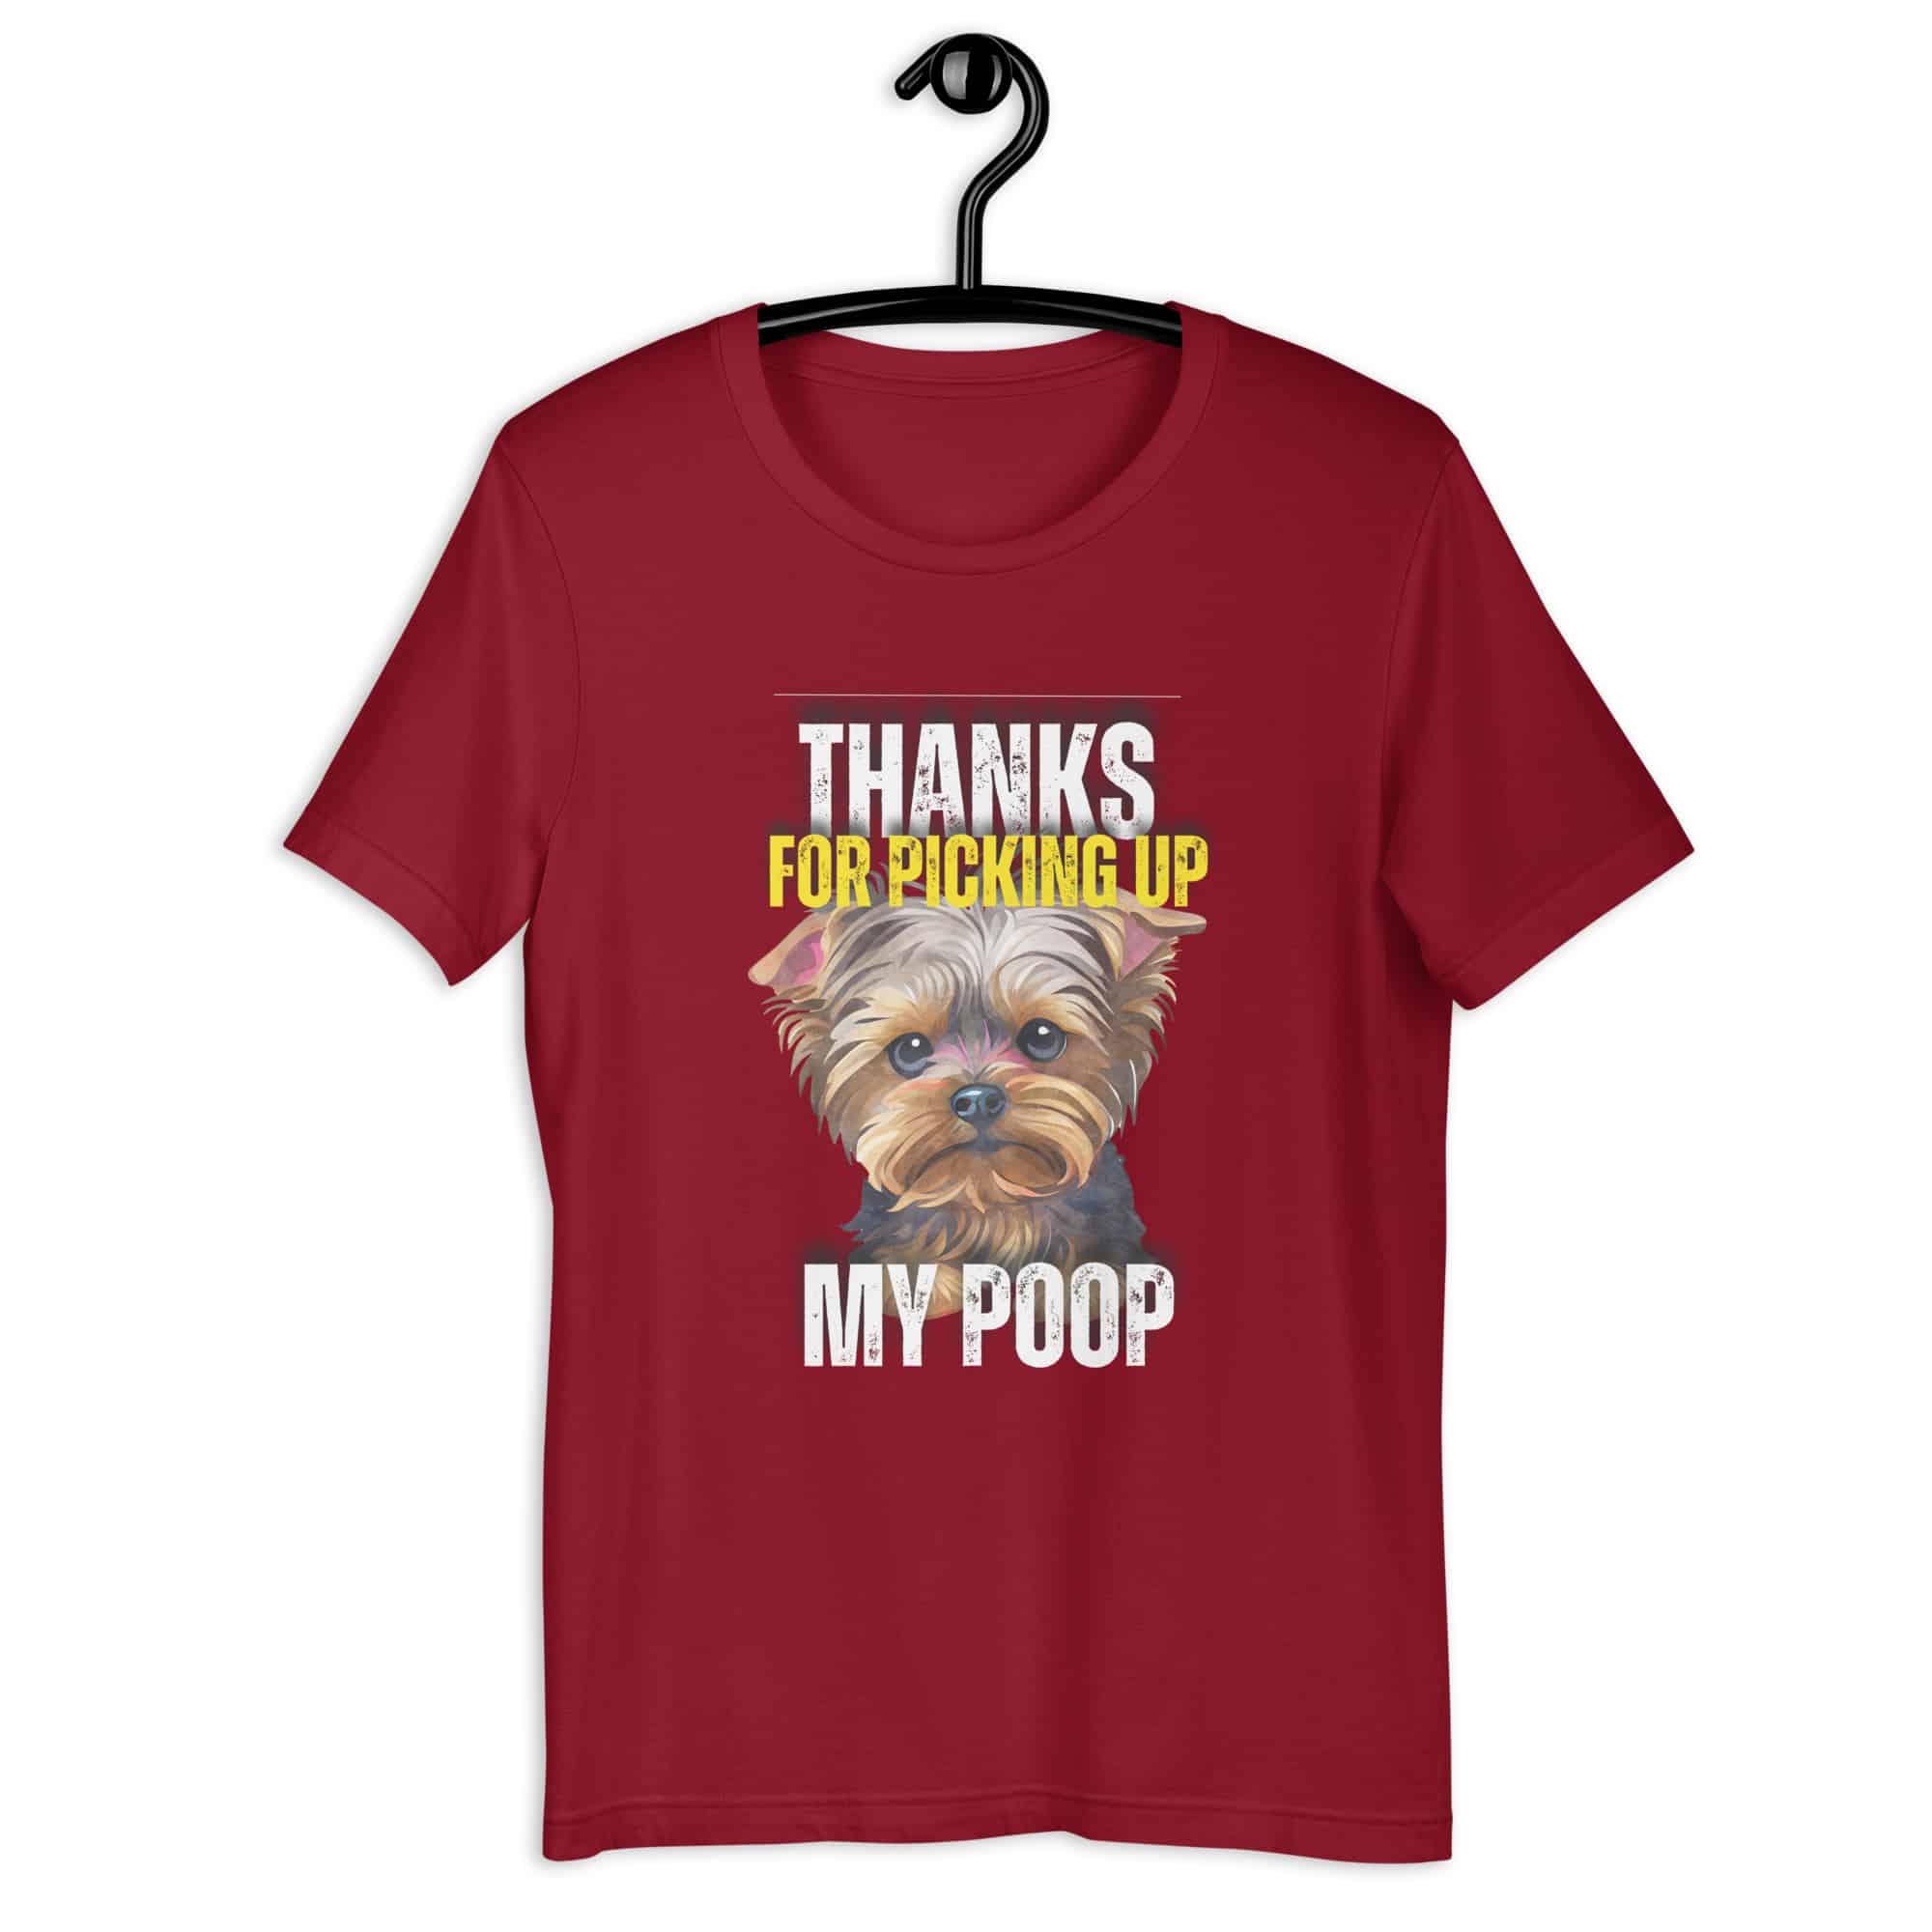 Thanks For Picking Up My POOP Funny Poodles Unisex T-Shirt. Cardinal